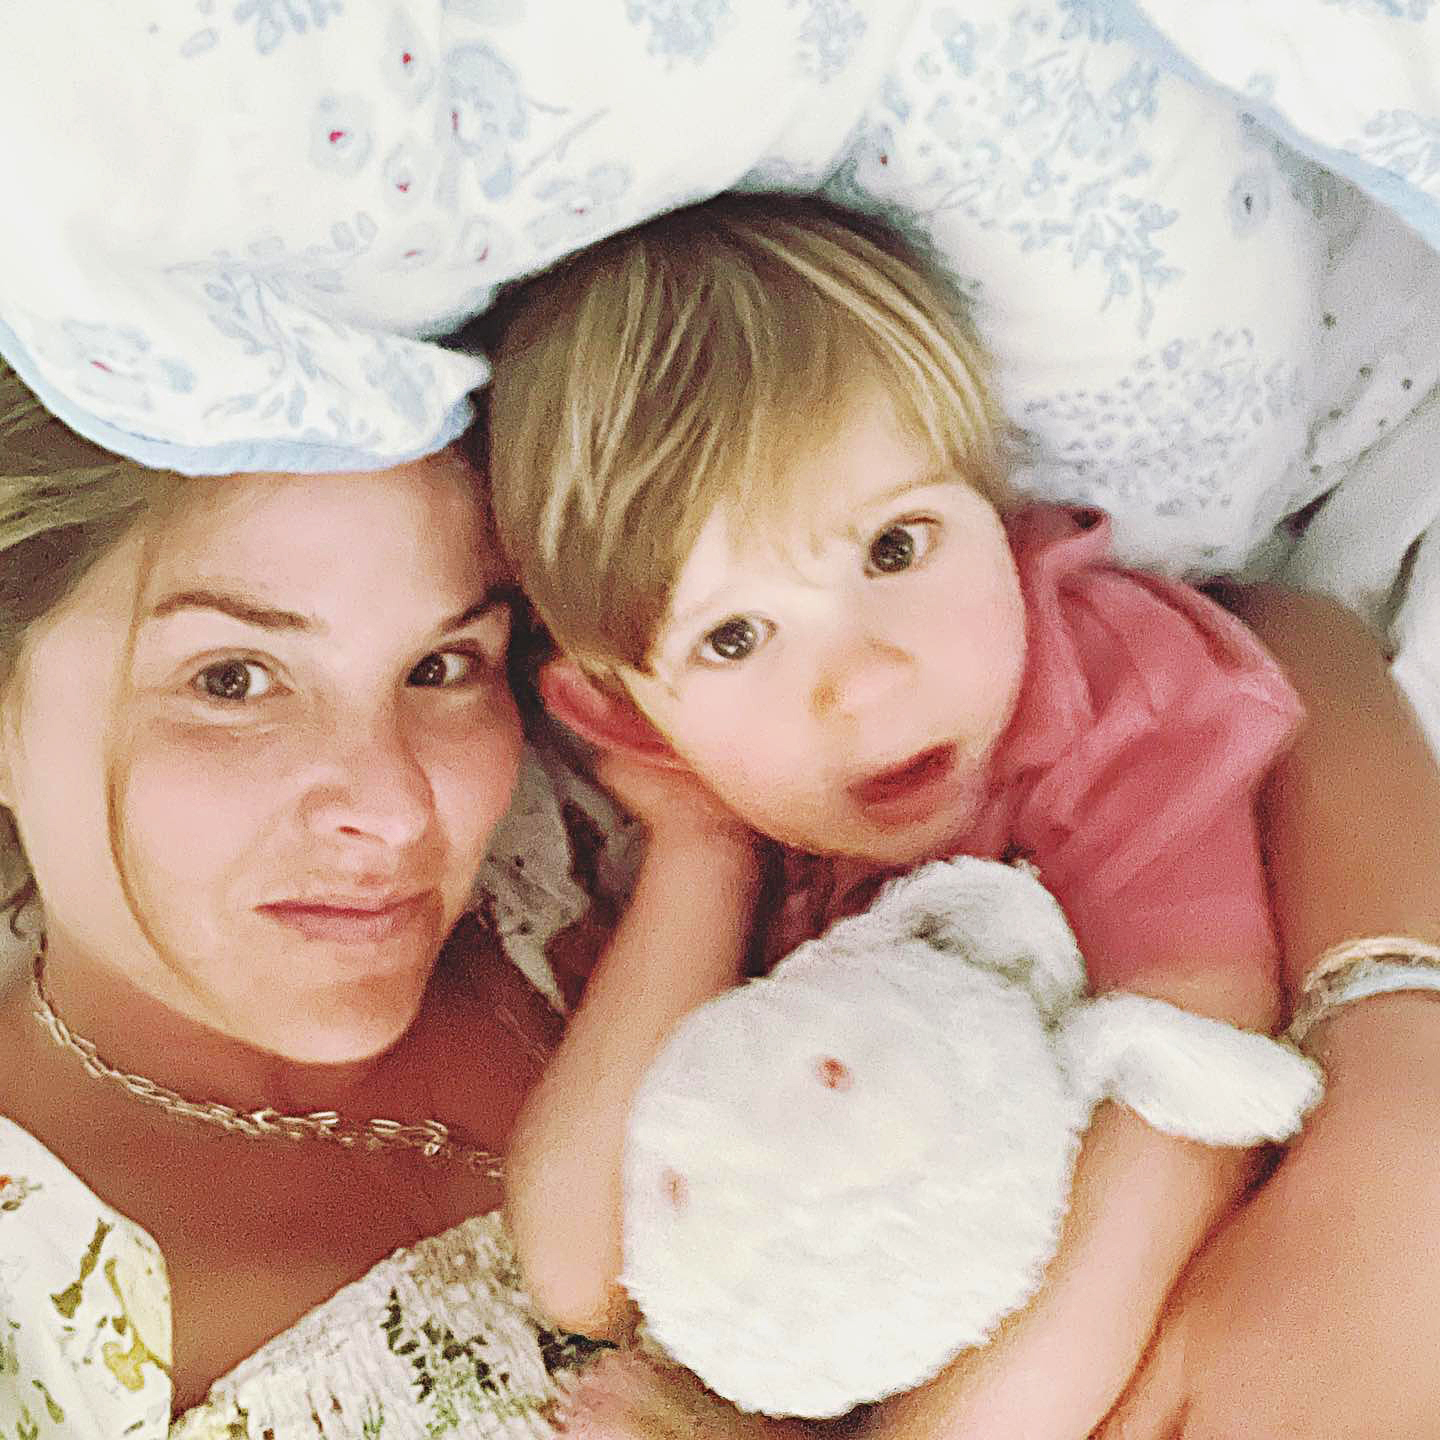 Jenna Bush Hager’s Son Hal 'Started Crying' After Seeing His Mom on TV